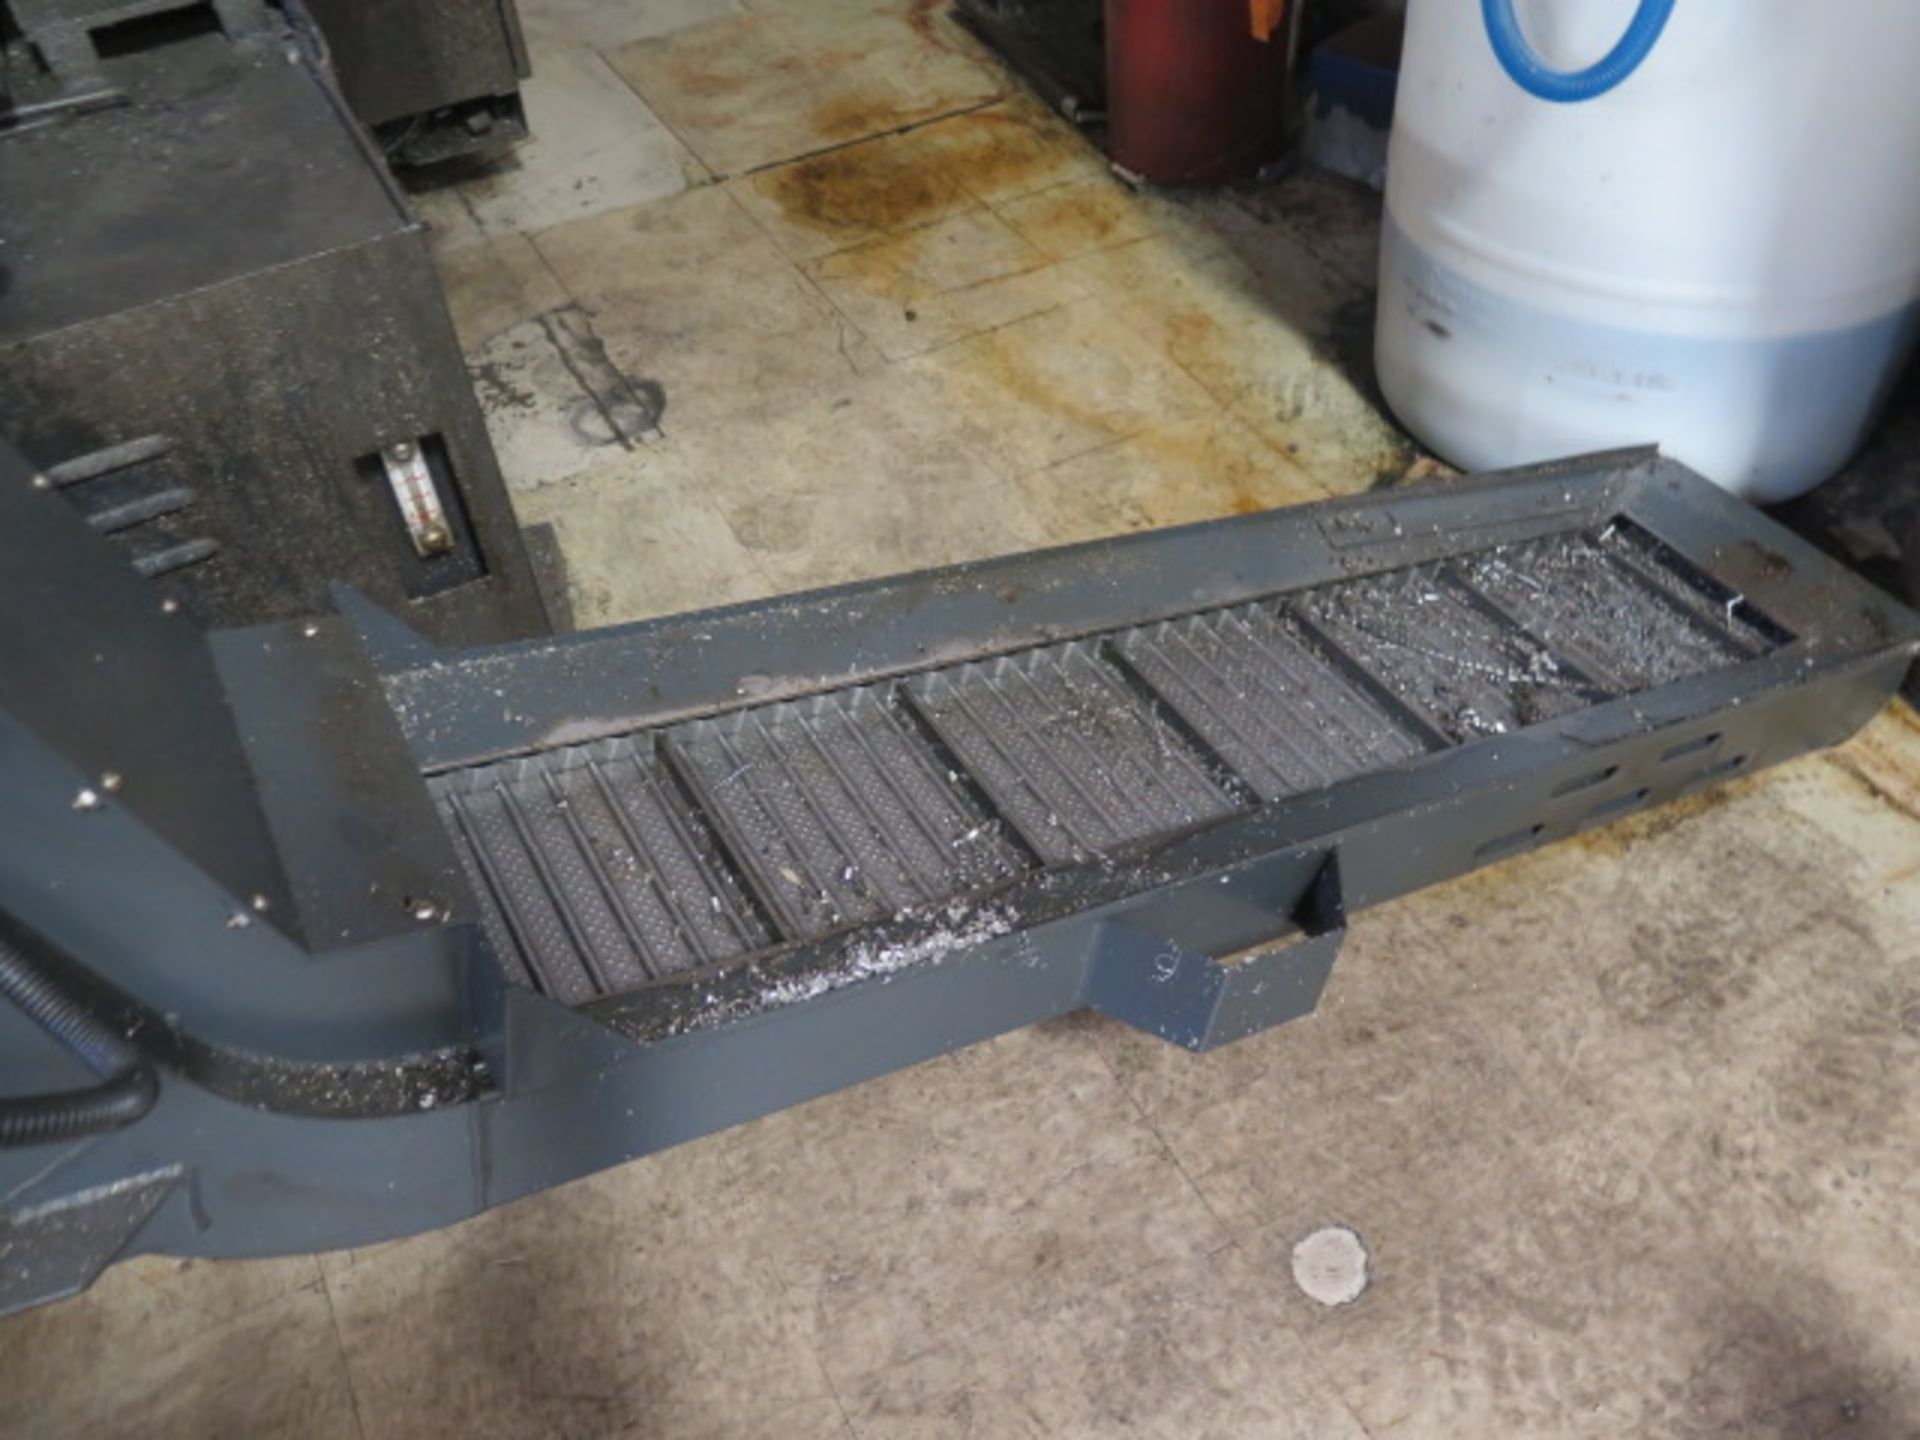 Talisawa 9 1/2" Chip Conveyor - Fits Into 16" x 52" Opening (SOLD AS-IS - NO WARRANTY) - Image 3 of 3